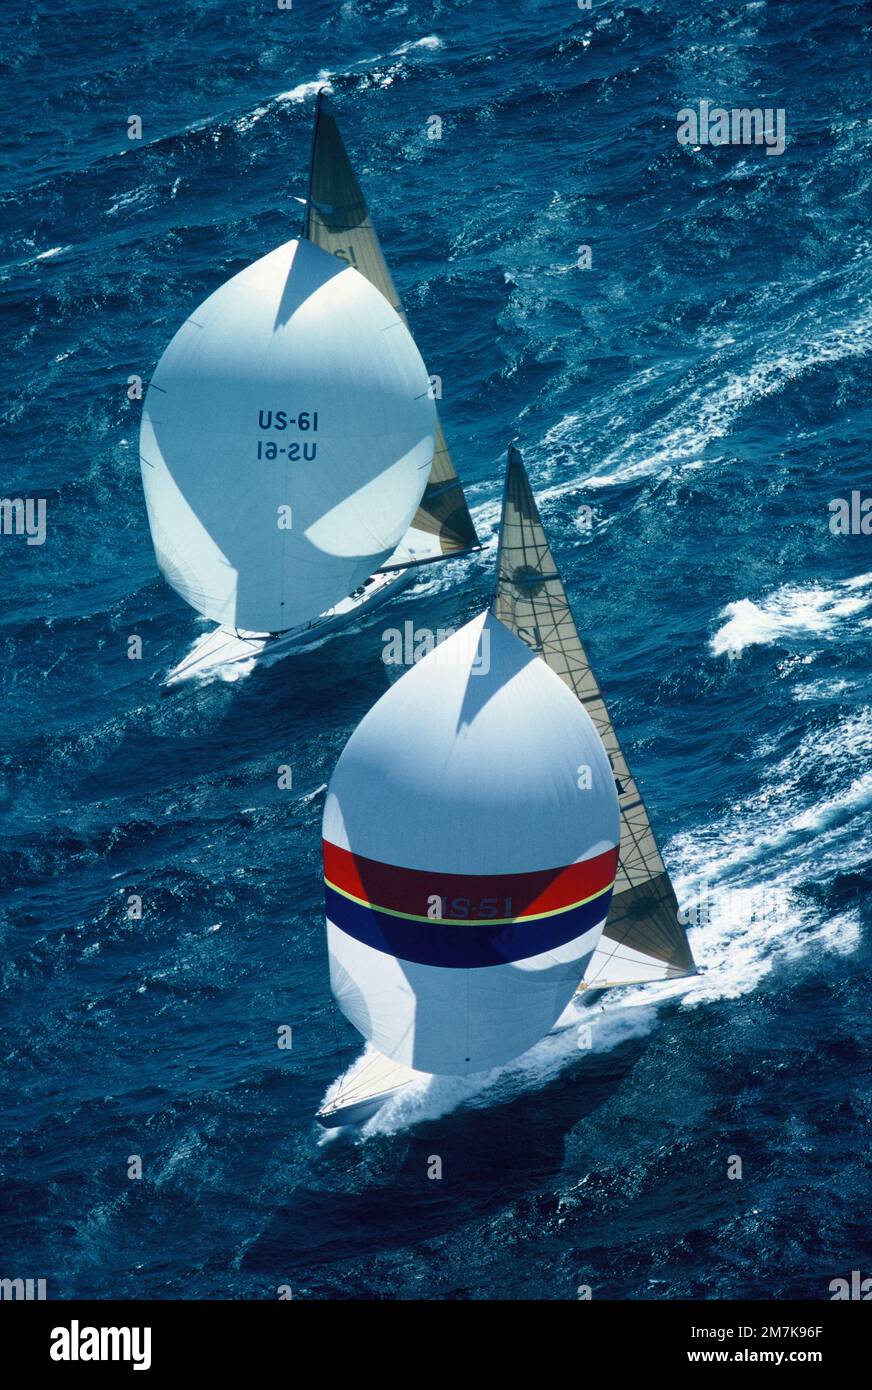 1983 americas cup poster